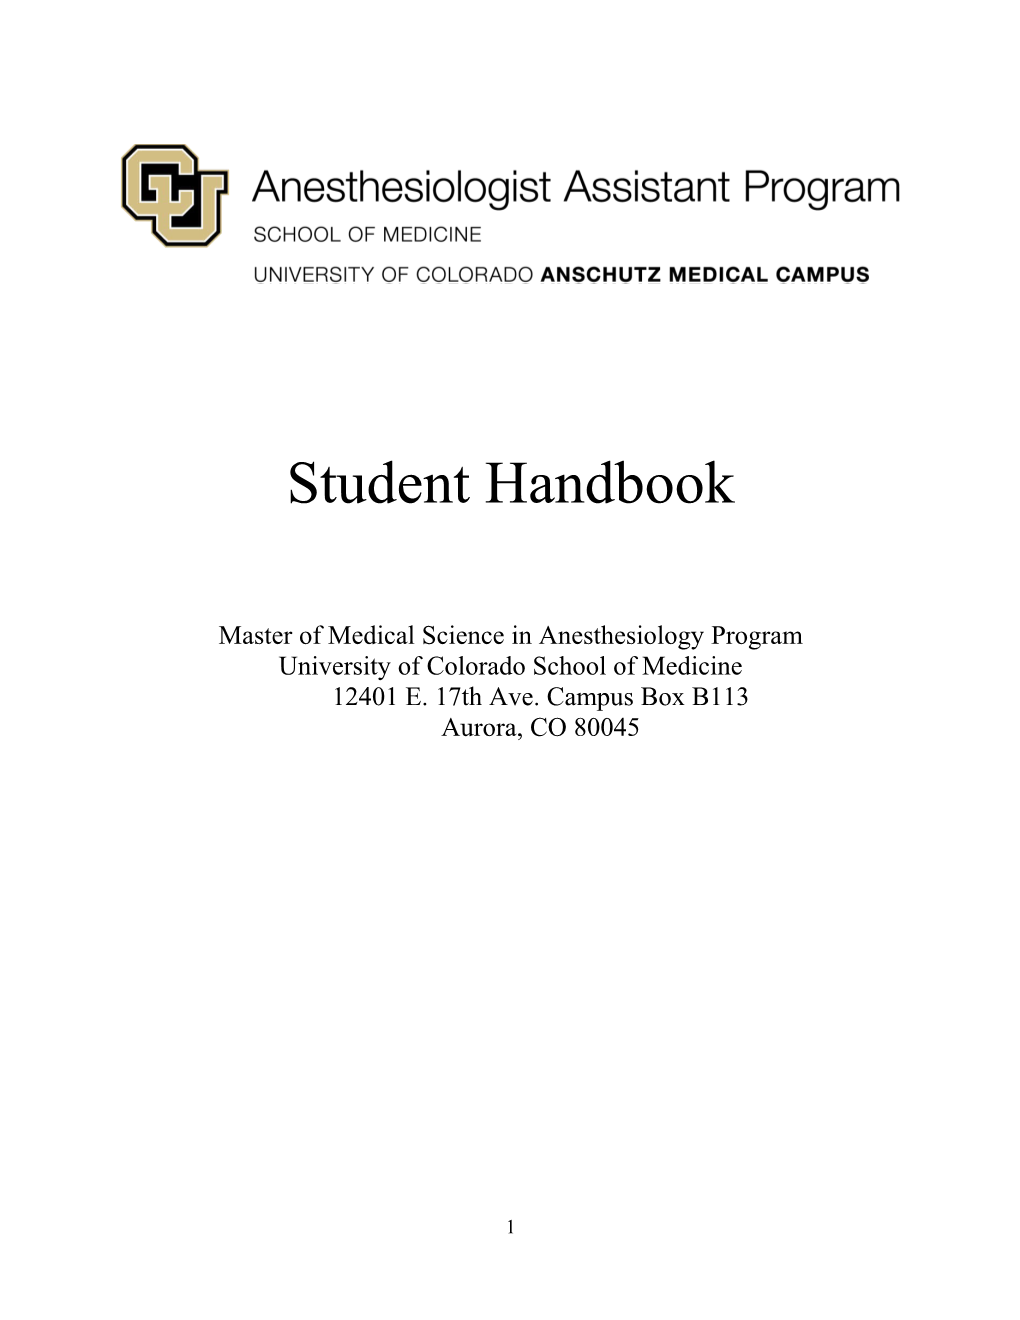 Master of Medical Science in Anesthesiology Program